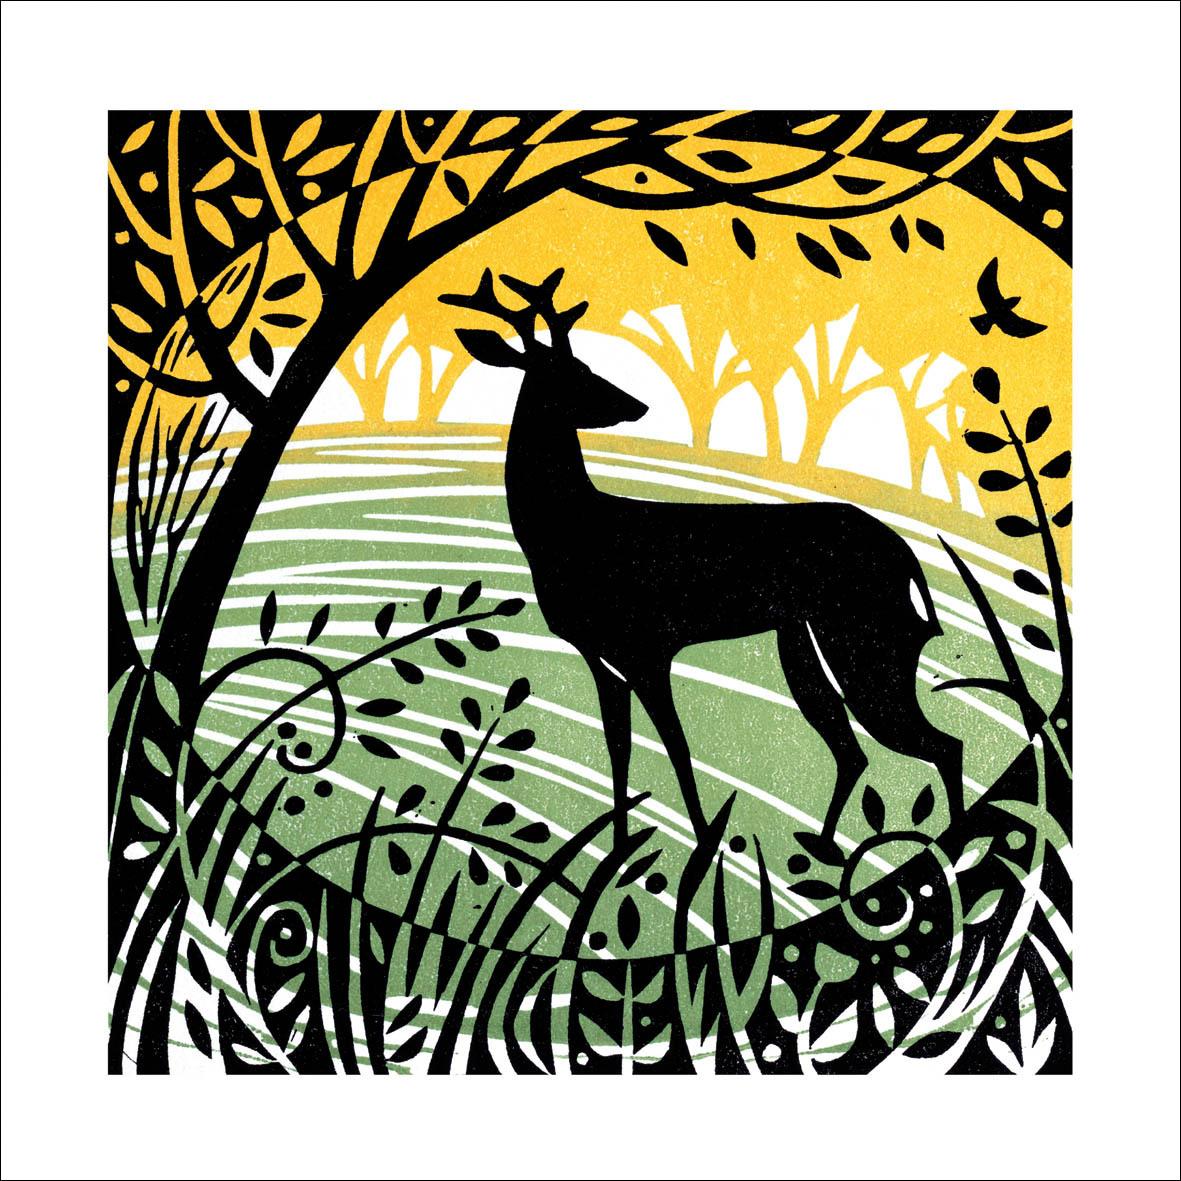 At the woods edge - Eco-friendly, recycled greetings card